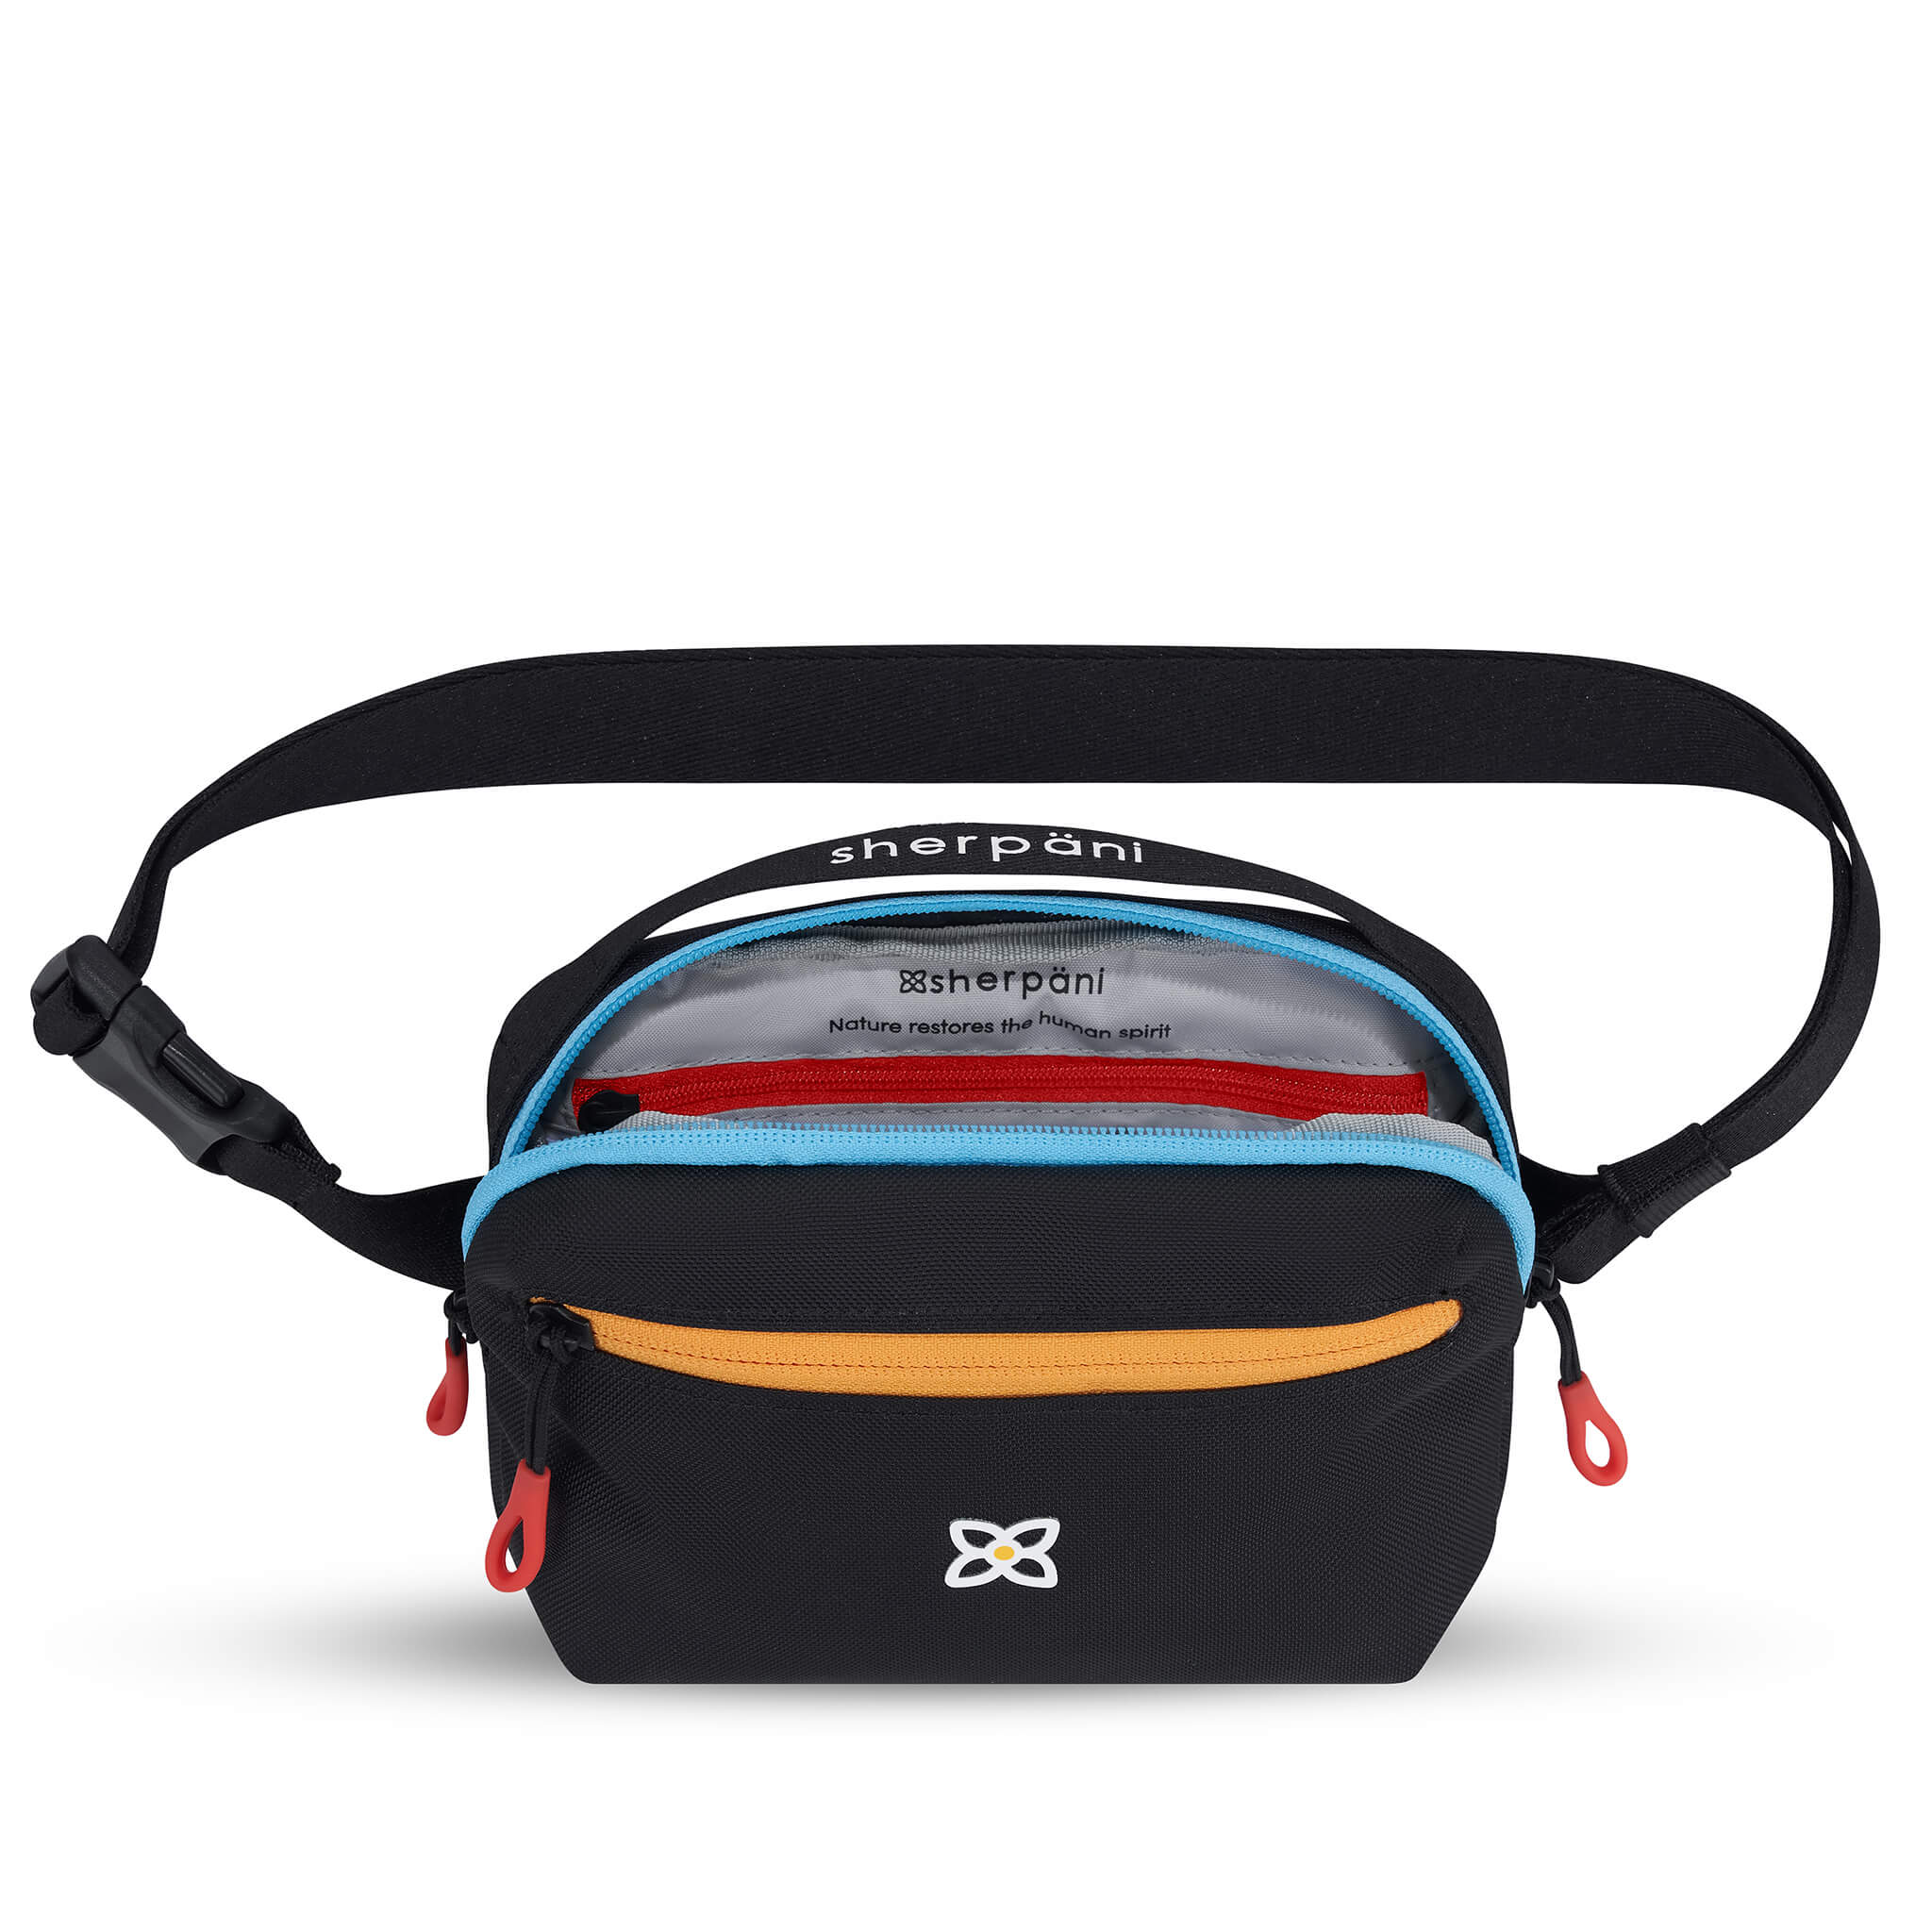 Top view of Sherpani's fanny pack, the Hyk in Chromatic. The main zipper compartment is open to reveal a light gray interior and an internal zipper pocket. 